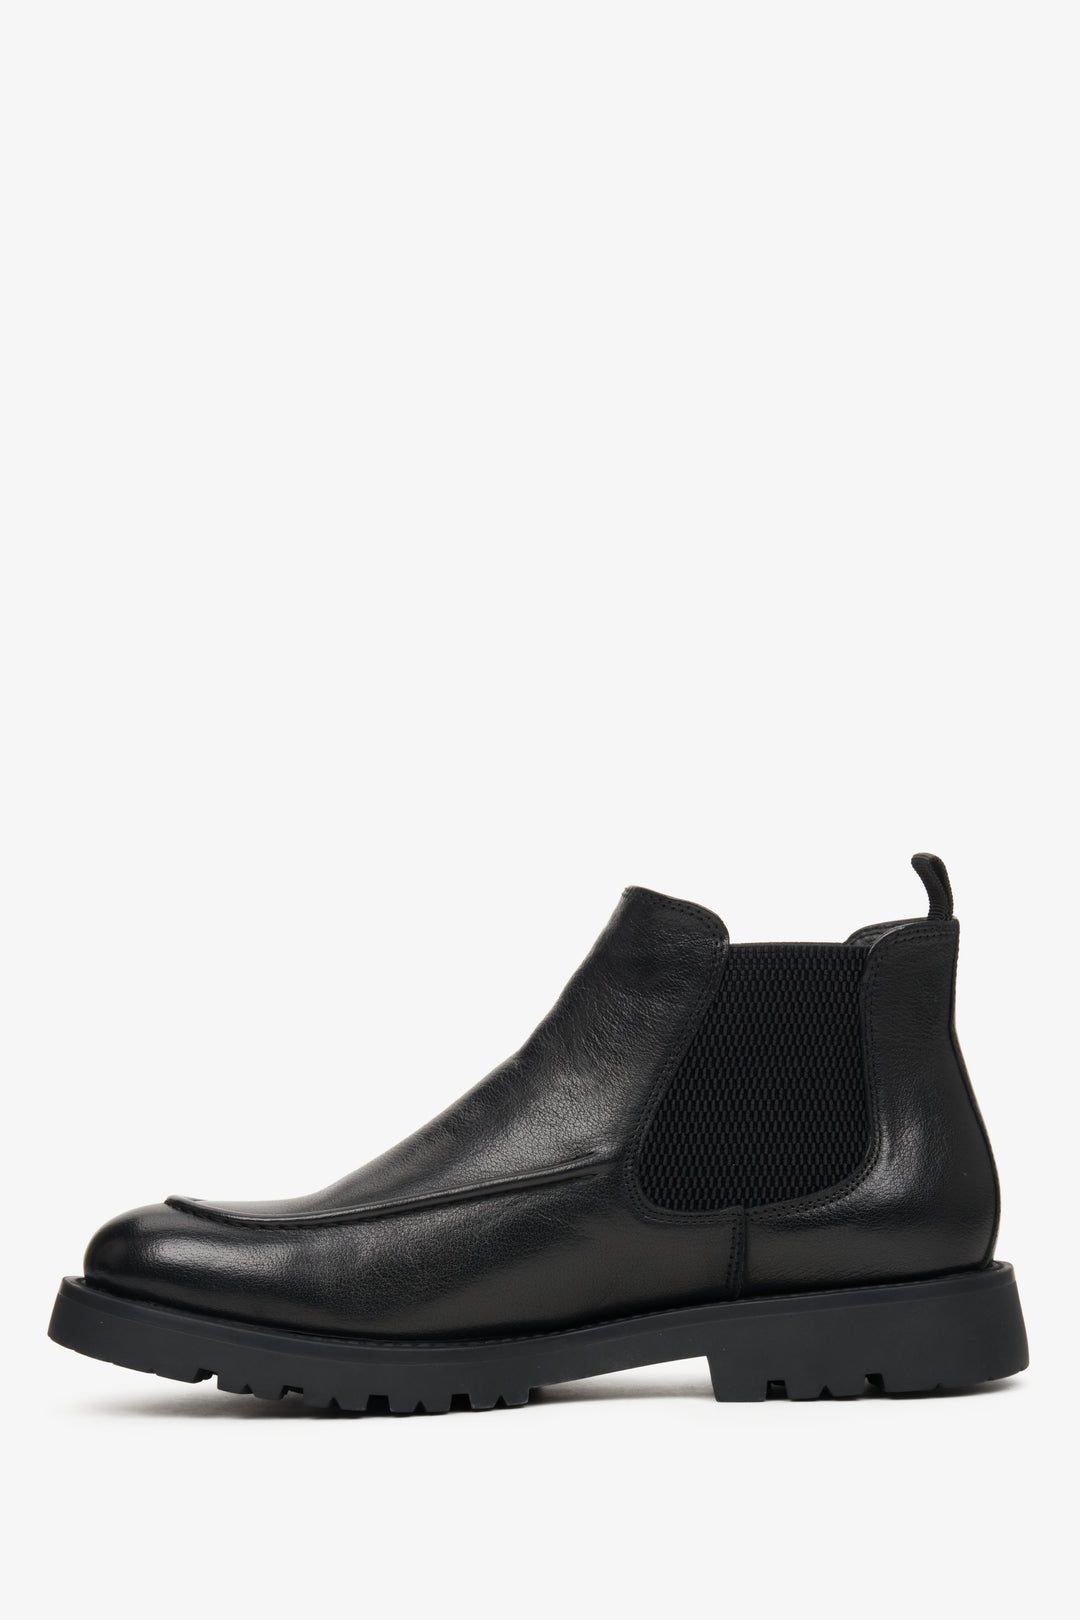 Low men's black ankle boots by Estro - side view presentation of the model.